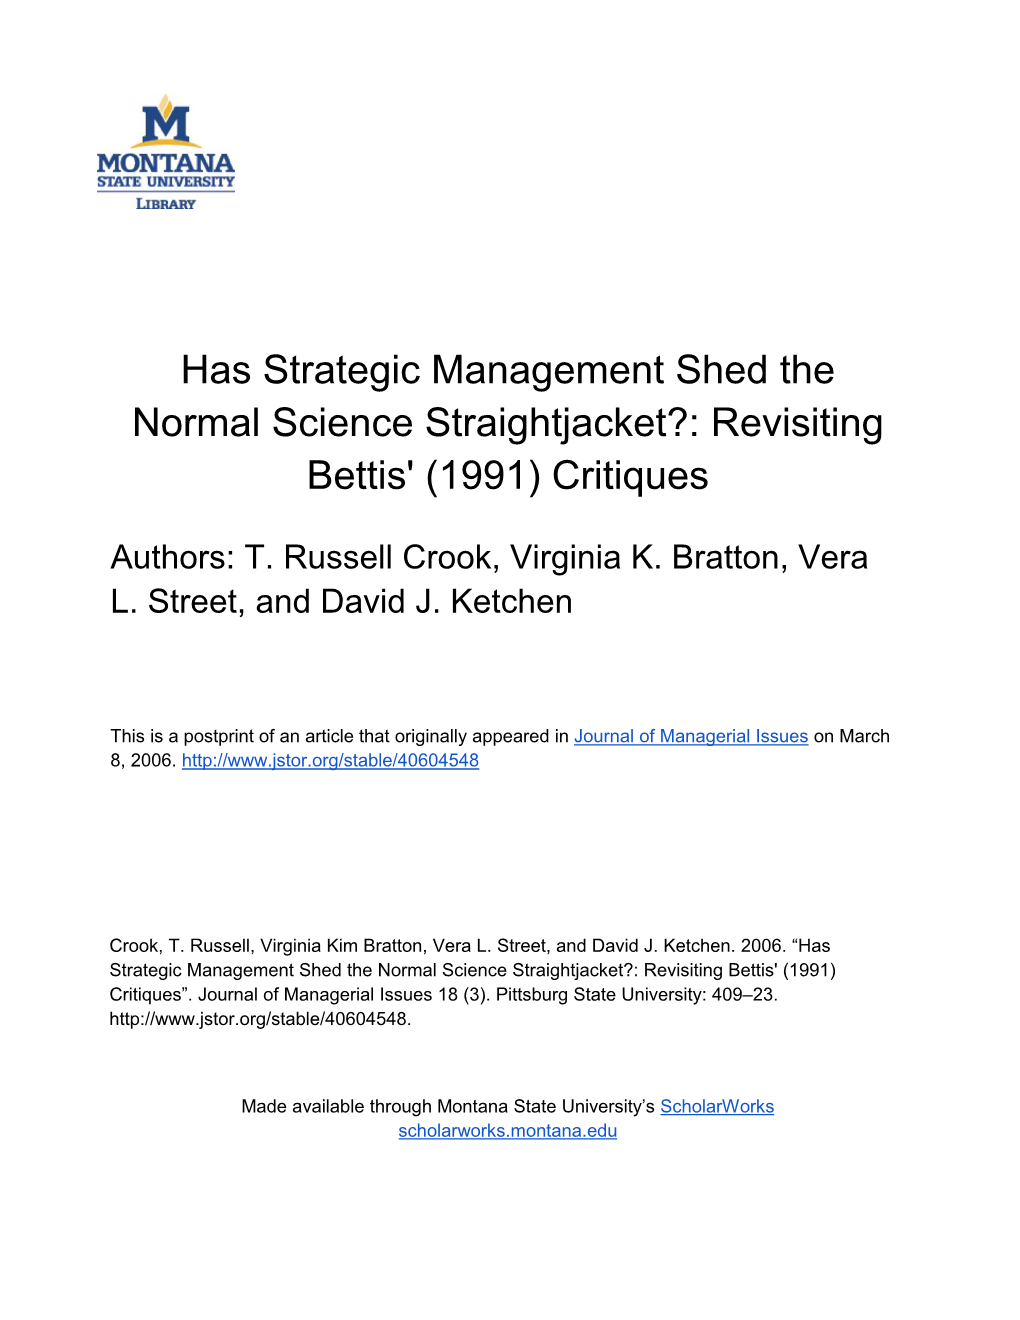 Has Strategic Management Shed the Normal Science Straightjacket?: Revisiting Bettis' (1991) Critiques